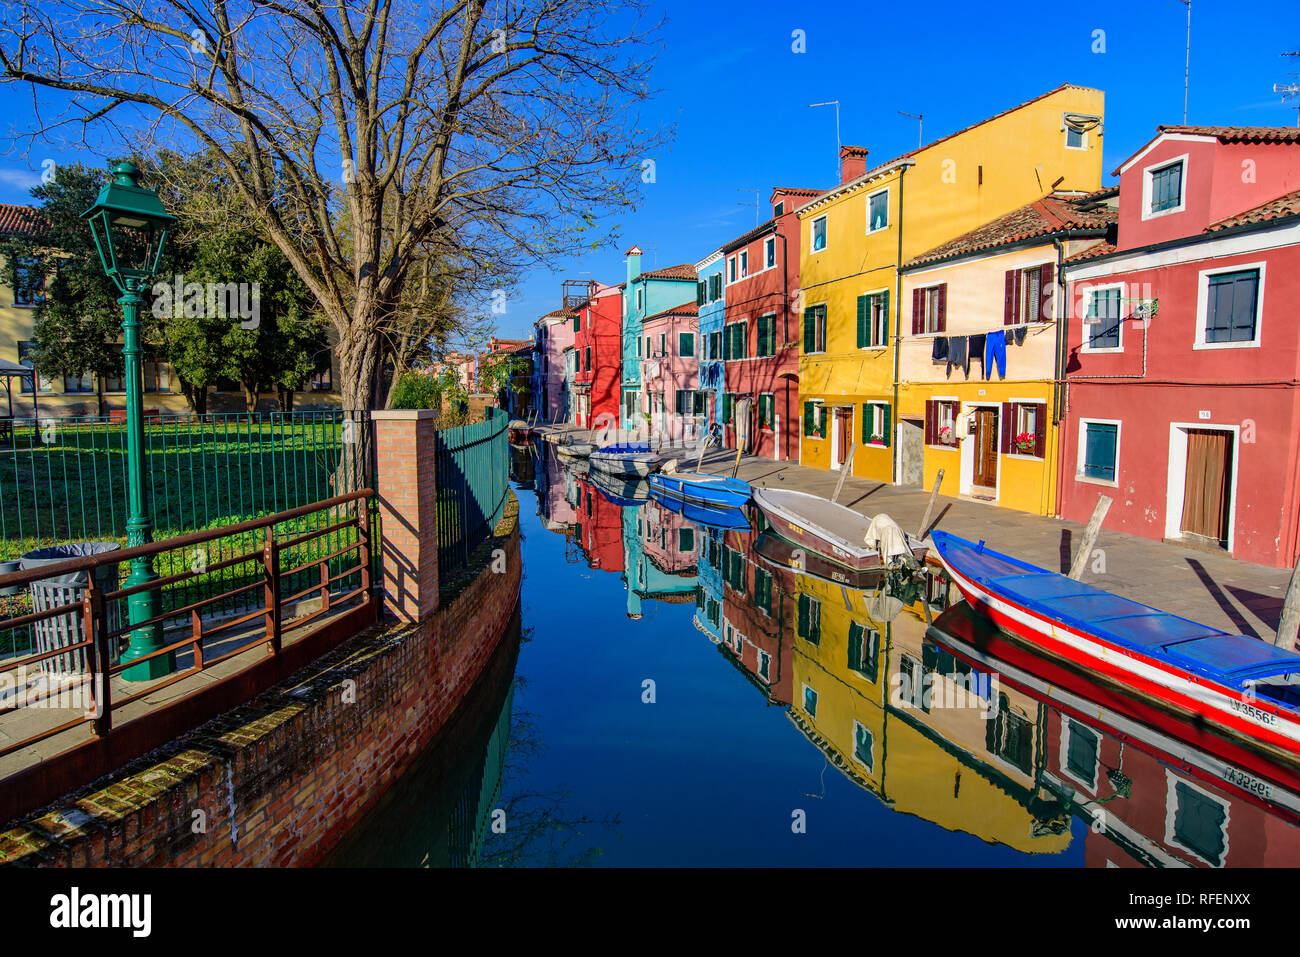 Burano island, famous for its colorful fishermen's houses, in Venice, Italy Stock Photo